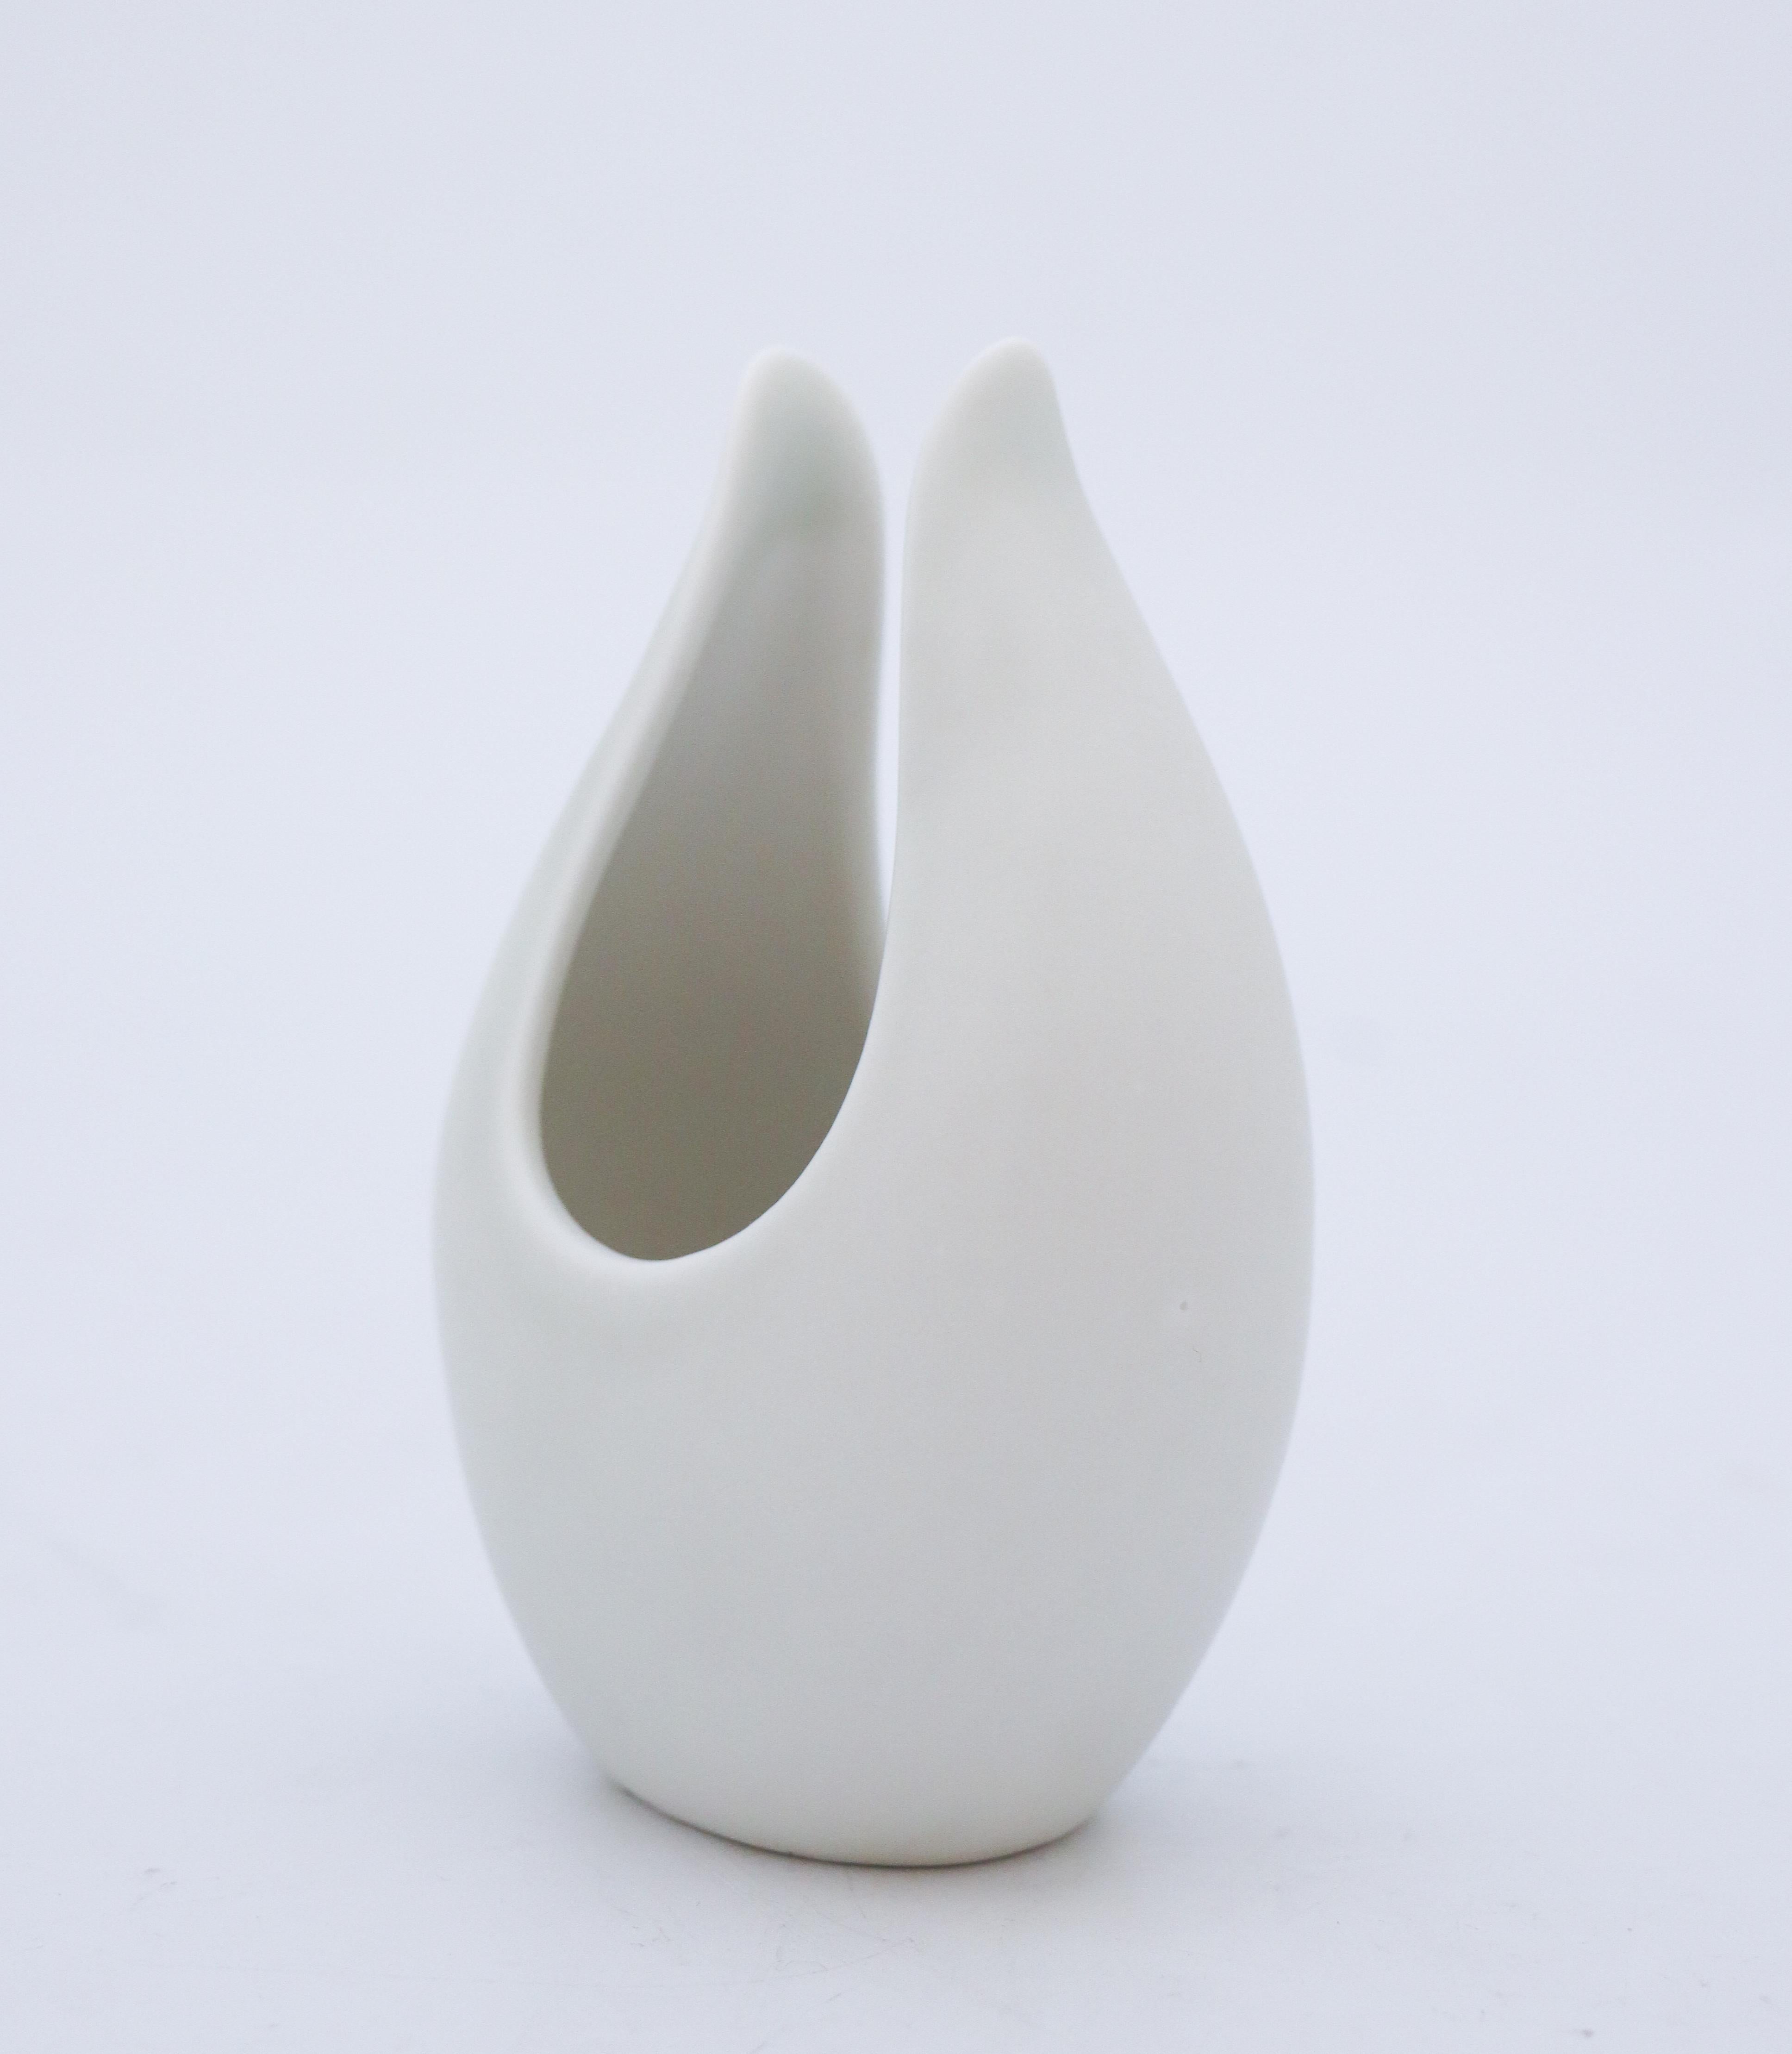 A white vase with a lovely shape designed by Gunnar Nylund at Rörstrand, the vase is 12.5 cm high and it is in very good condition except from a minor air bubble in the glaze why it is marked as 2nd quality.